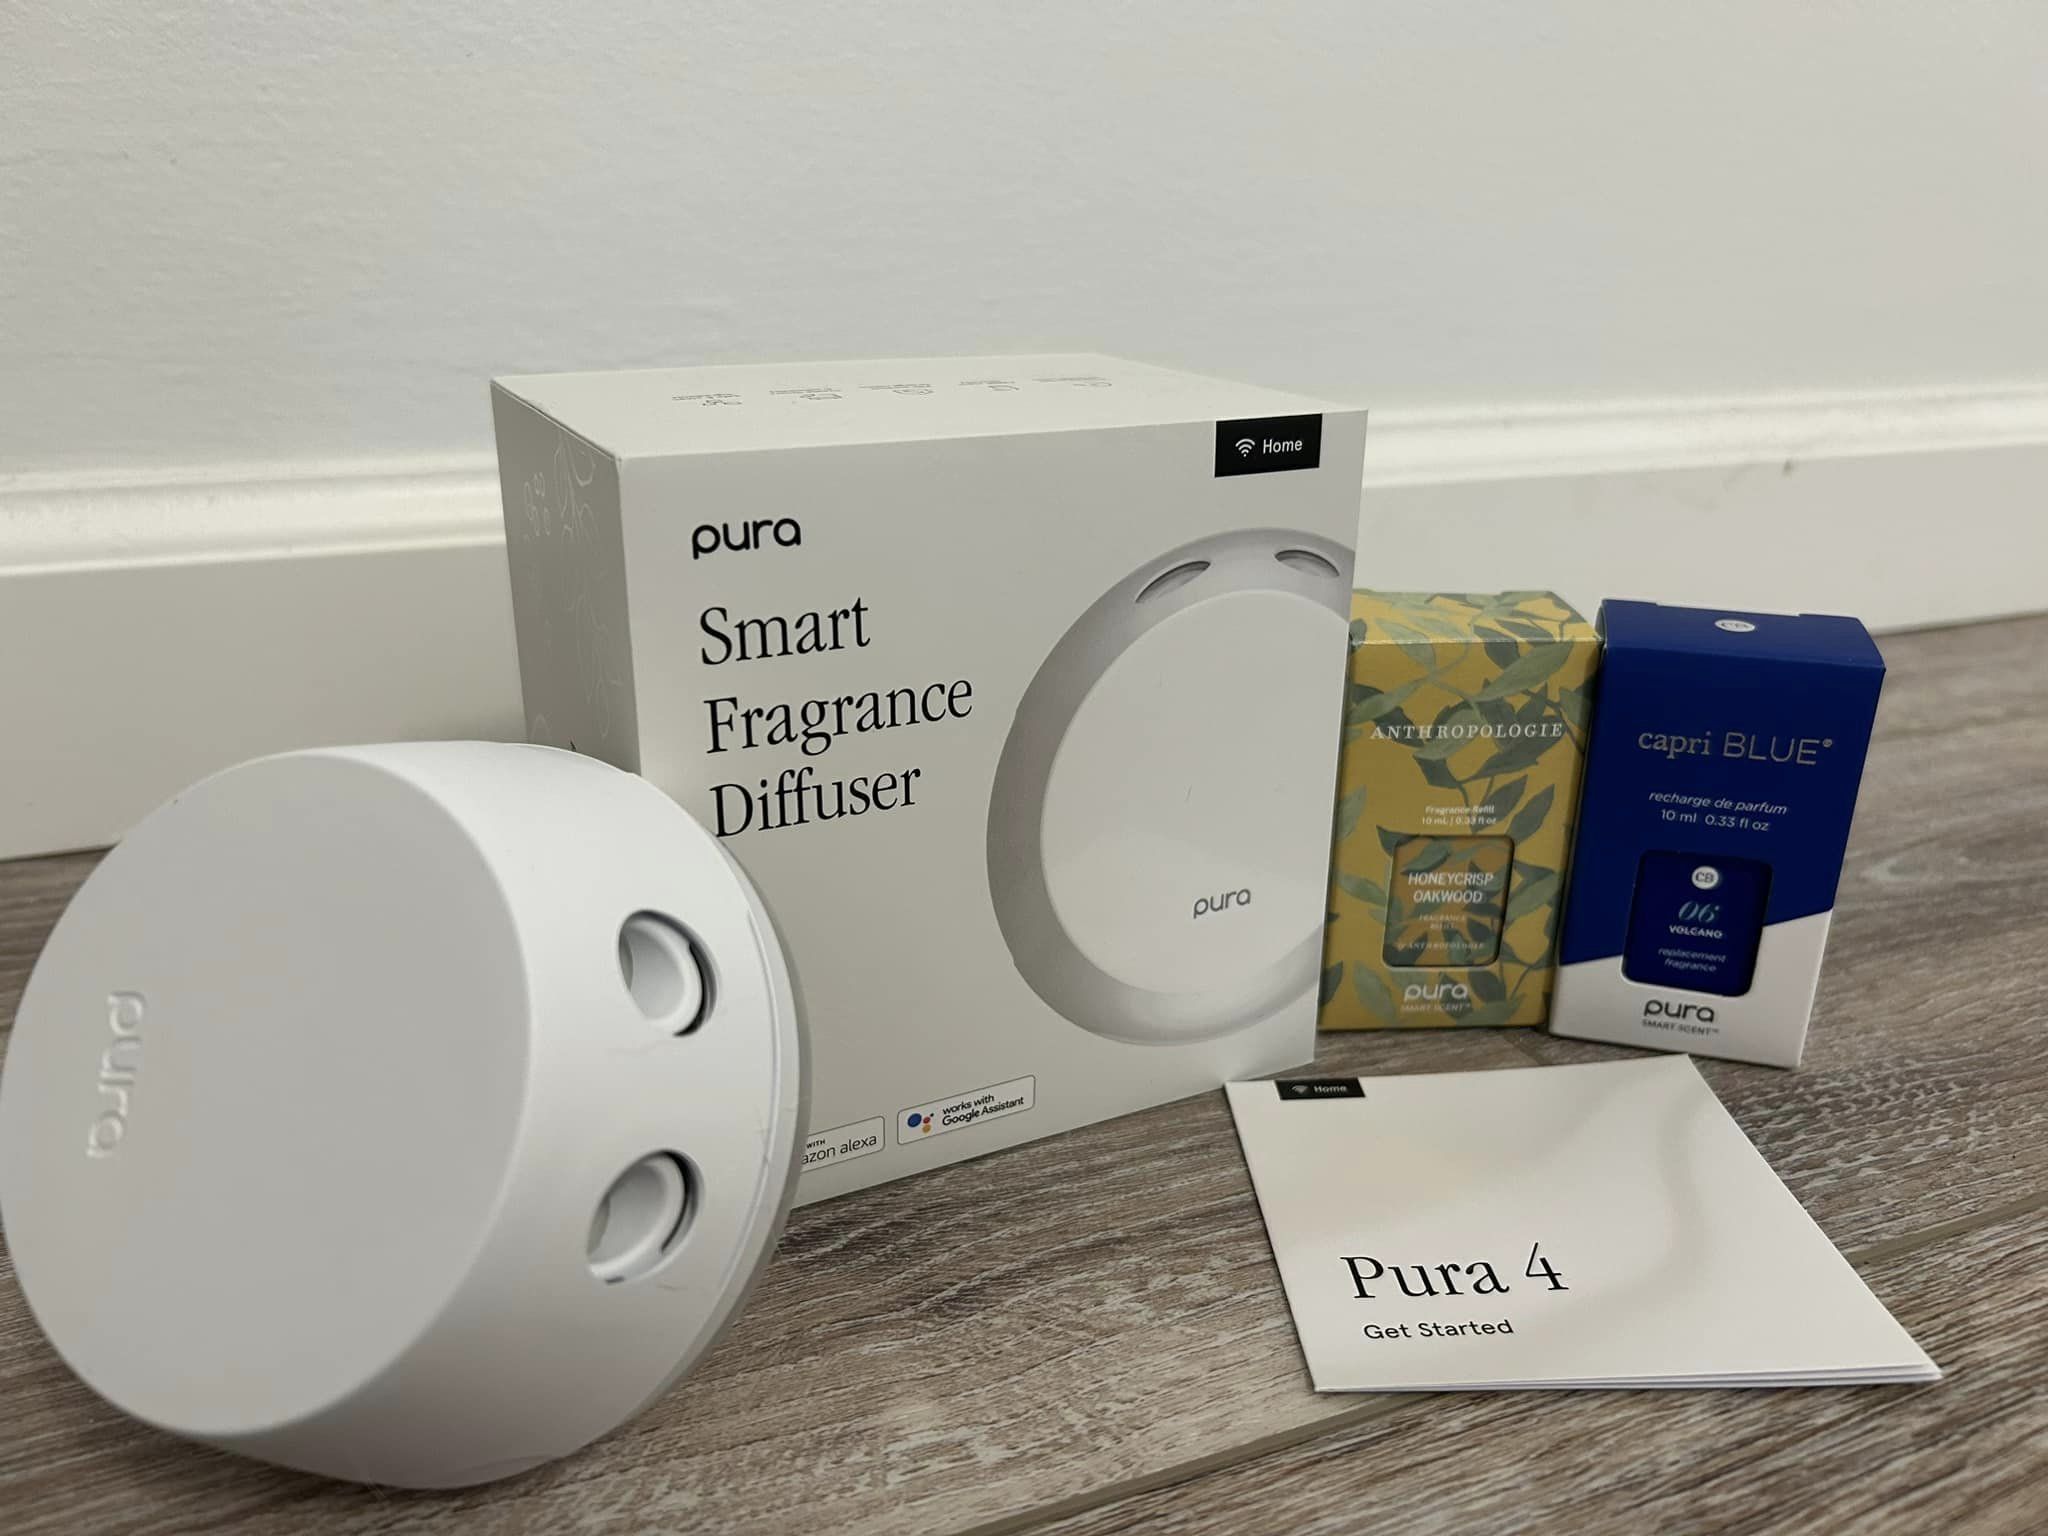 Forget Pura Smart Diffuser. Just get a smart plug and hook it up